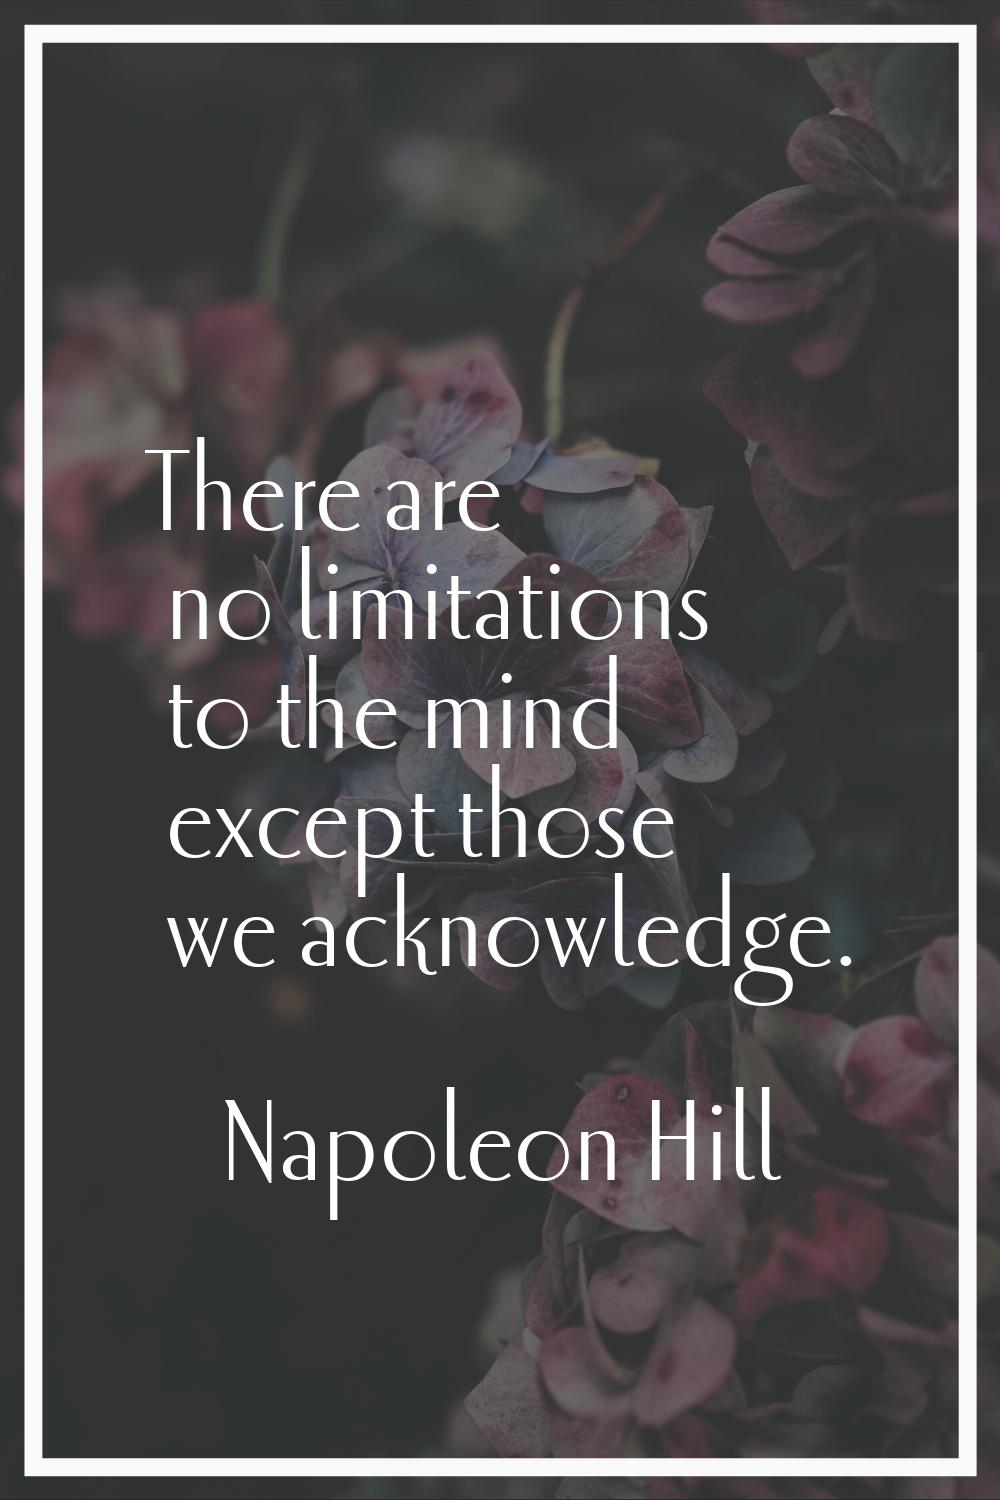 There are no limitations to the mind except those we acknowledge.